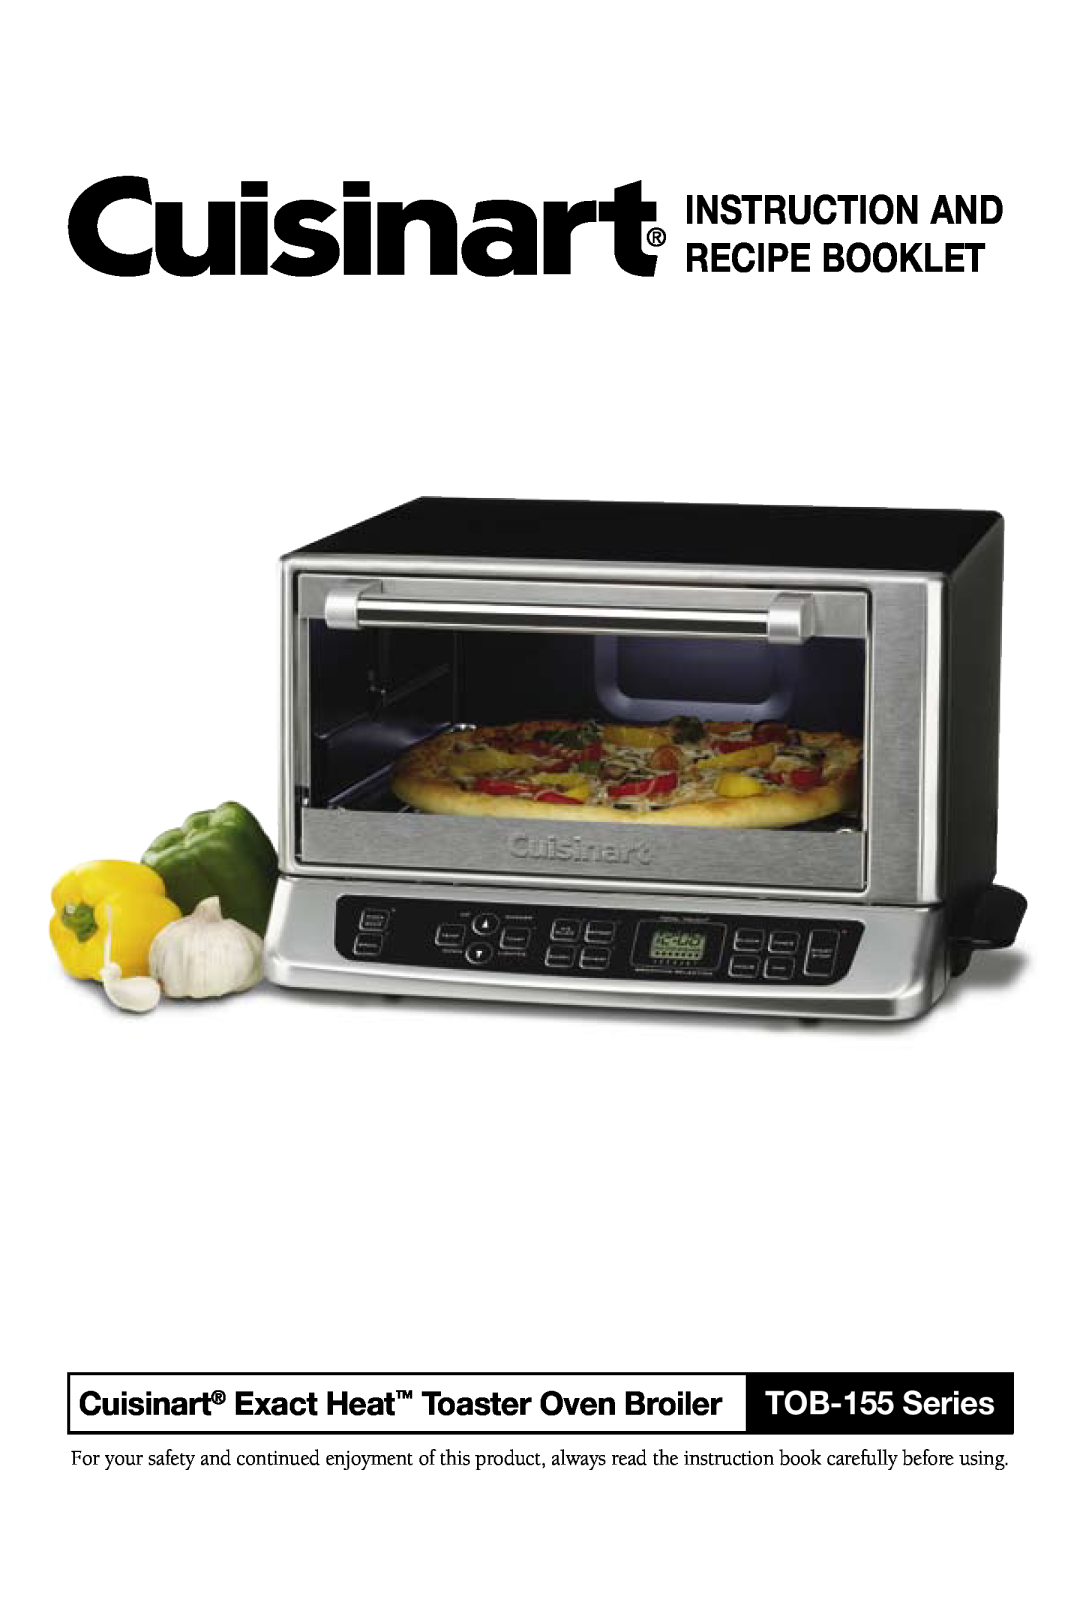 Cuisinart manual Instruction And Recipe Booklet, Cuisinart Exact Heat Toaster Oven Broiler TOB-155 Series 